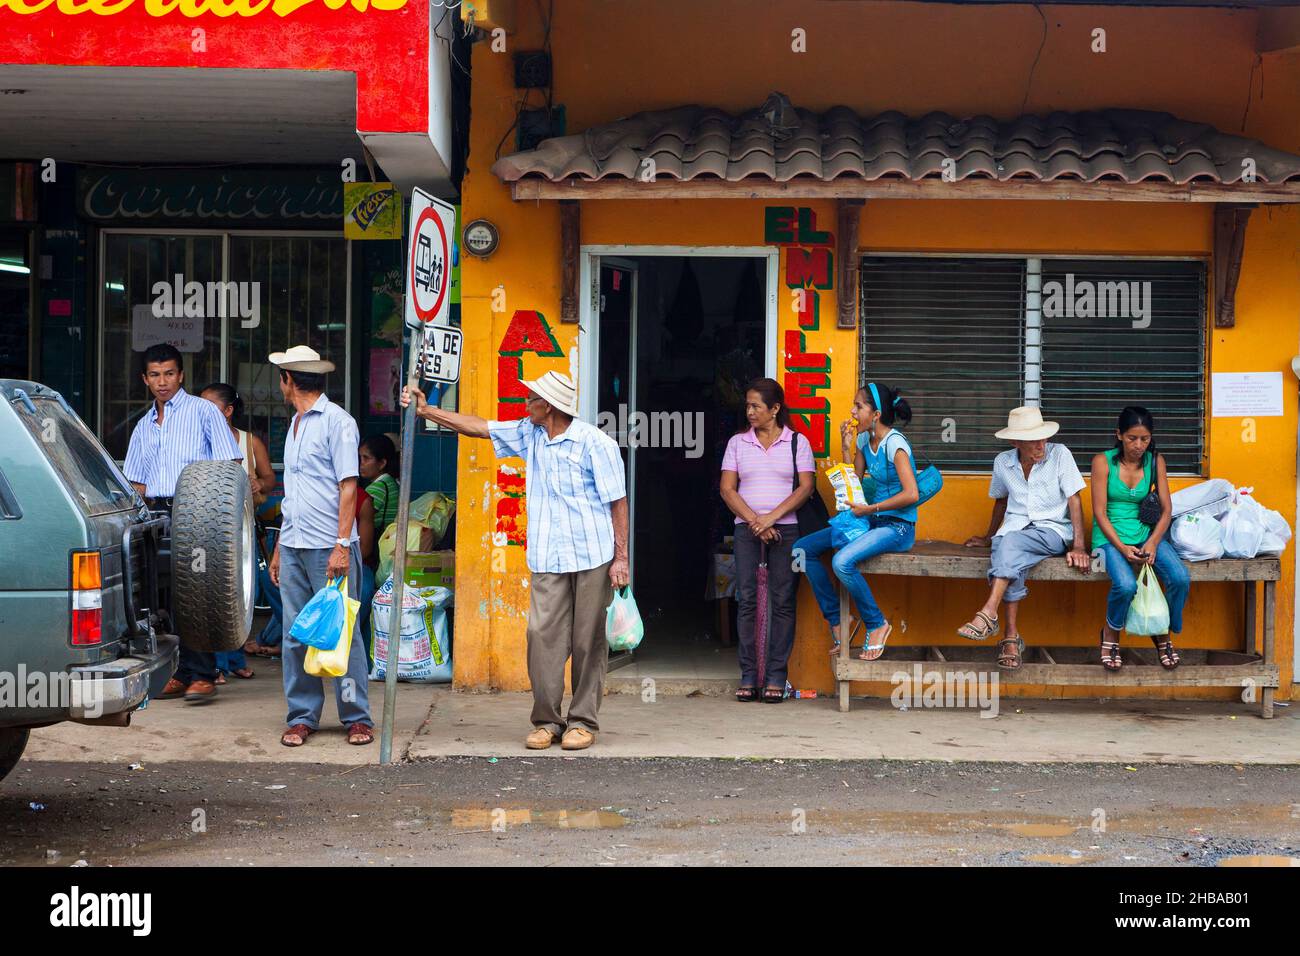 Panamanian people are waiting for the bus at the bus station in the town Ocu, Herrera province, Republic of Panama, Central America. Stock Photo